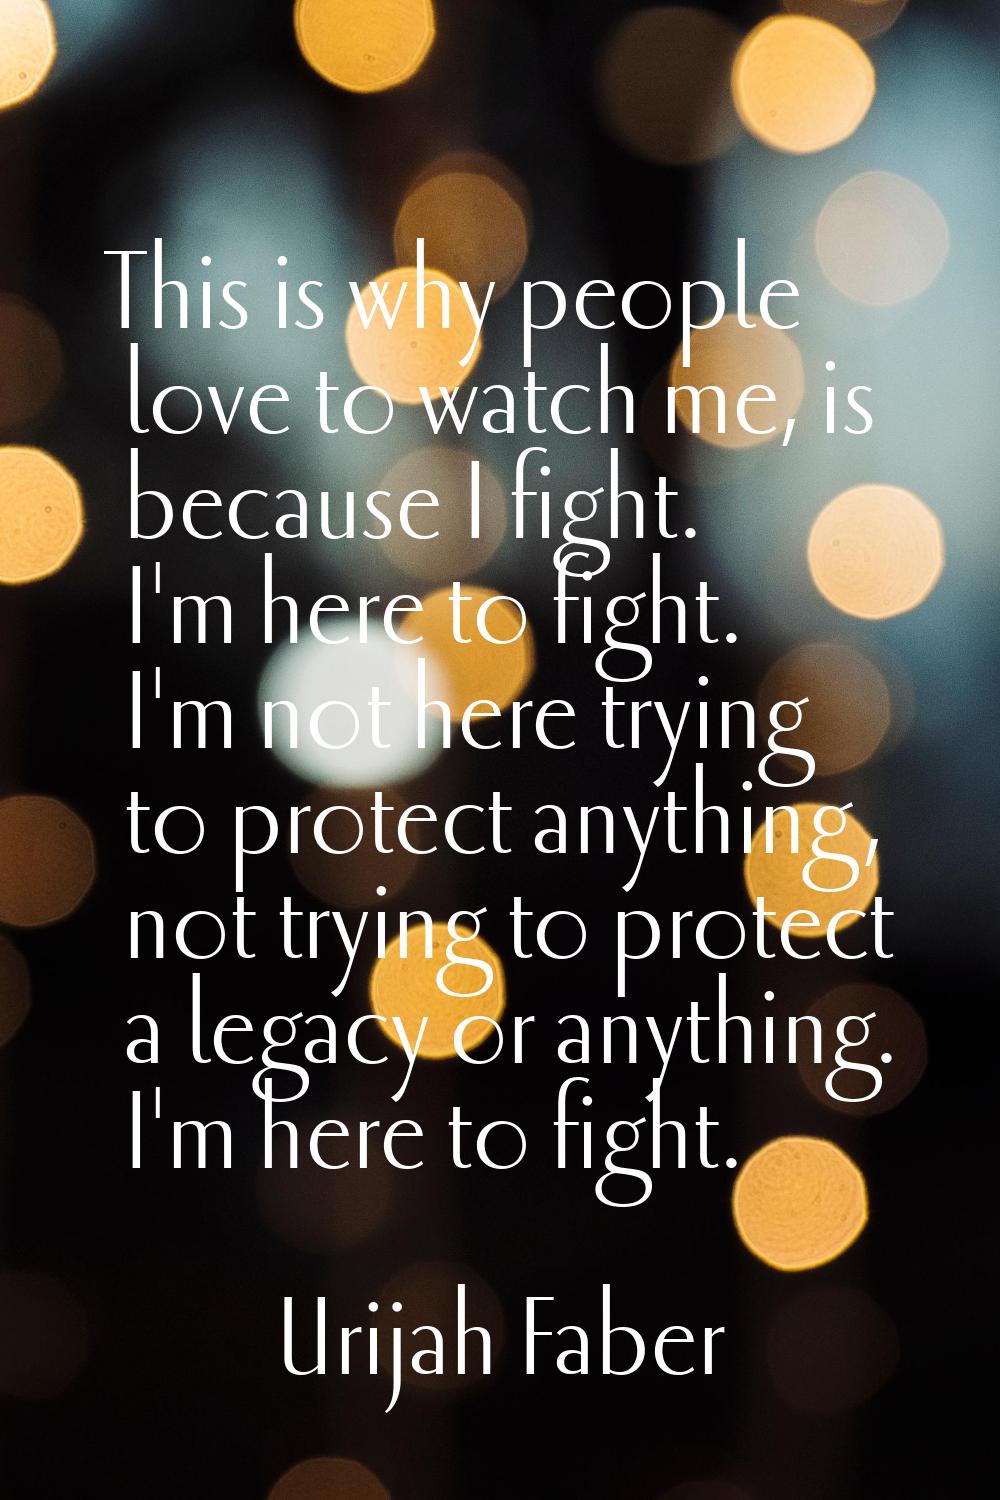 This is why people love to watch me, is because I fight. I'm here to fight. I'm not here trying to 